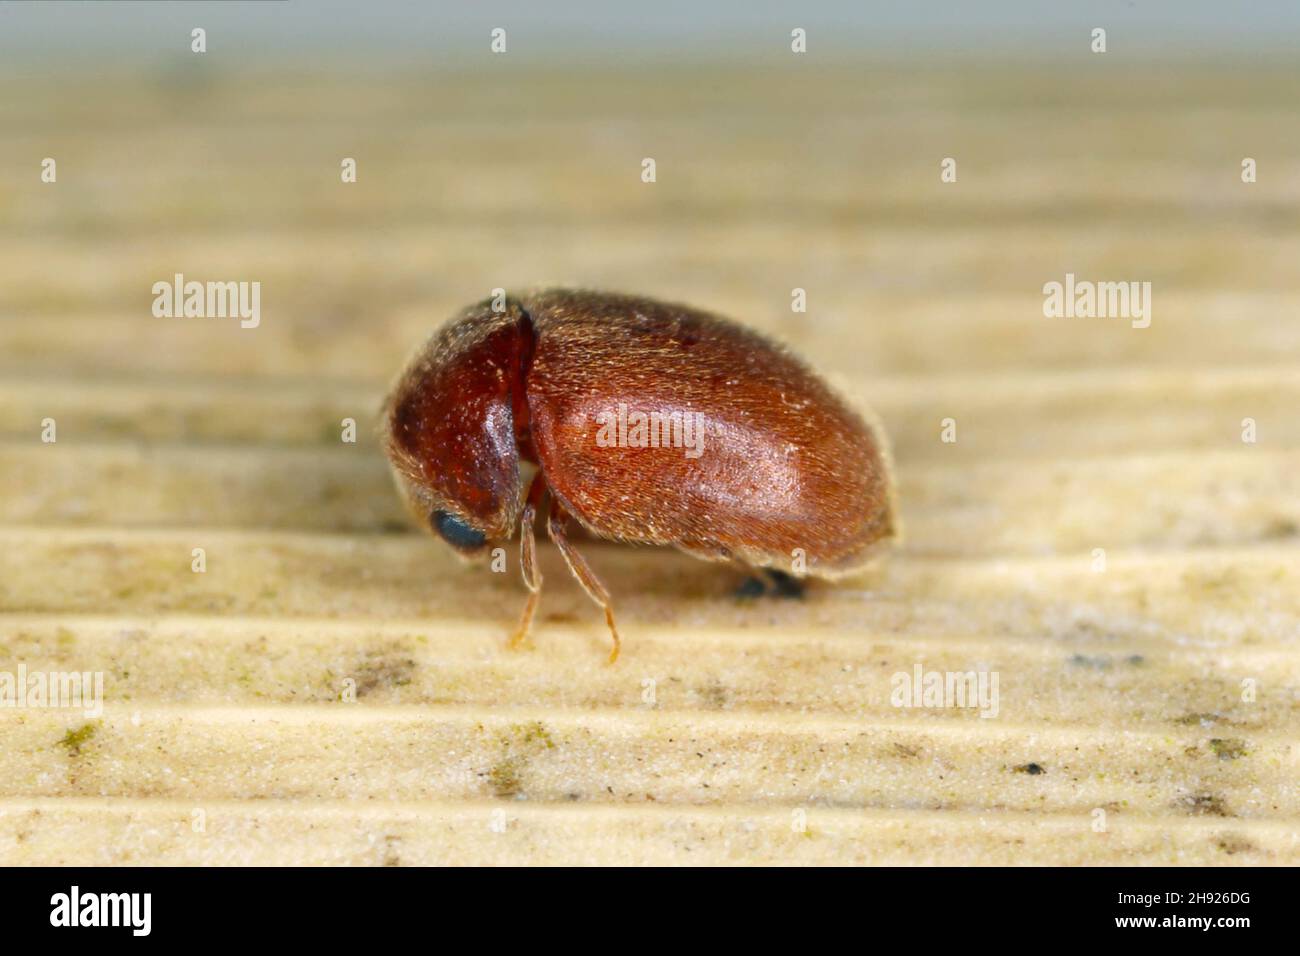 Lasioderma serricorne commonly known as the cigarette beetle, cigar beetle, or tobacco beetle is pest of tobacco dried herbs and many of others stored Stock Photo